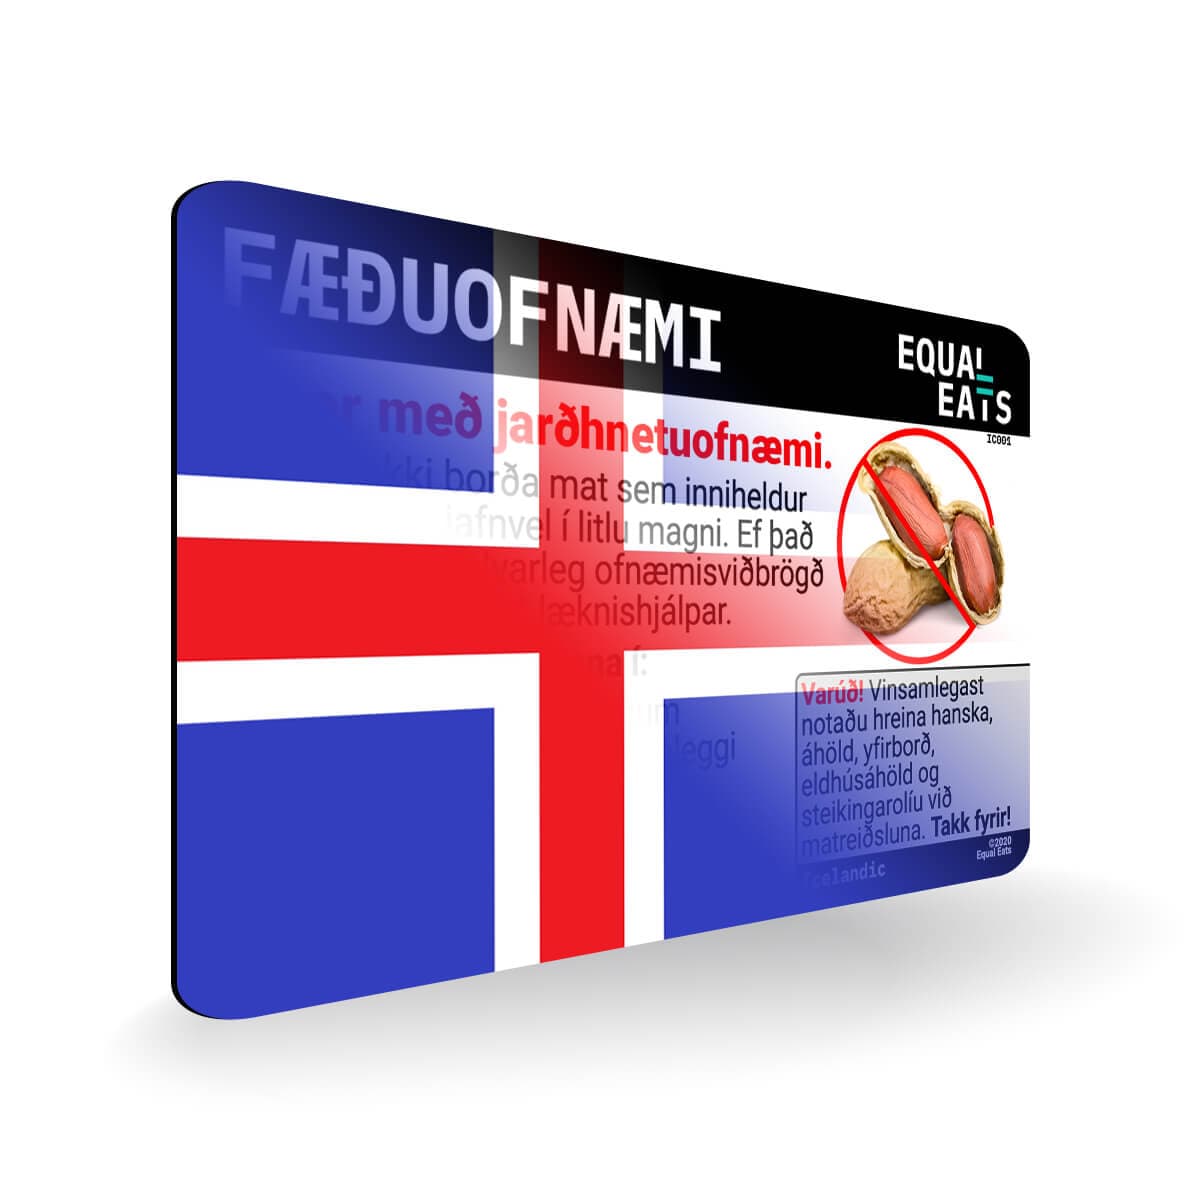 Peanut in Icelandic, Equal Eats Peanut Allergy Card for Iceland